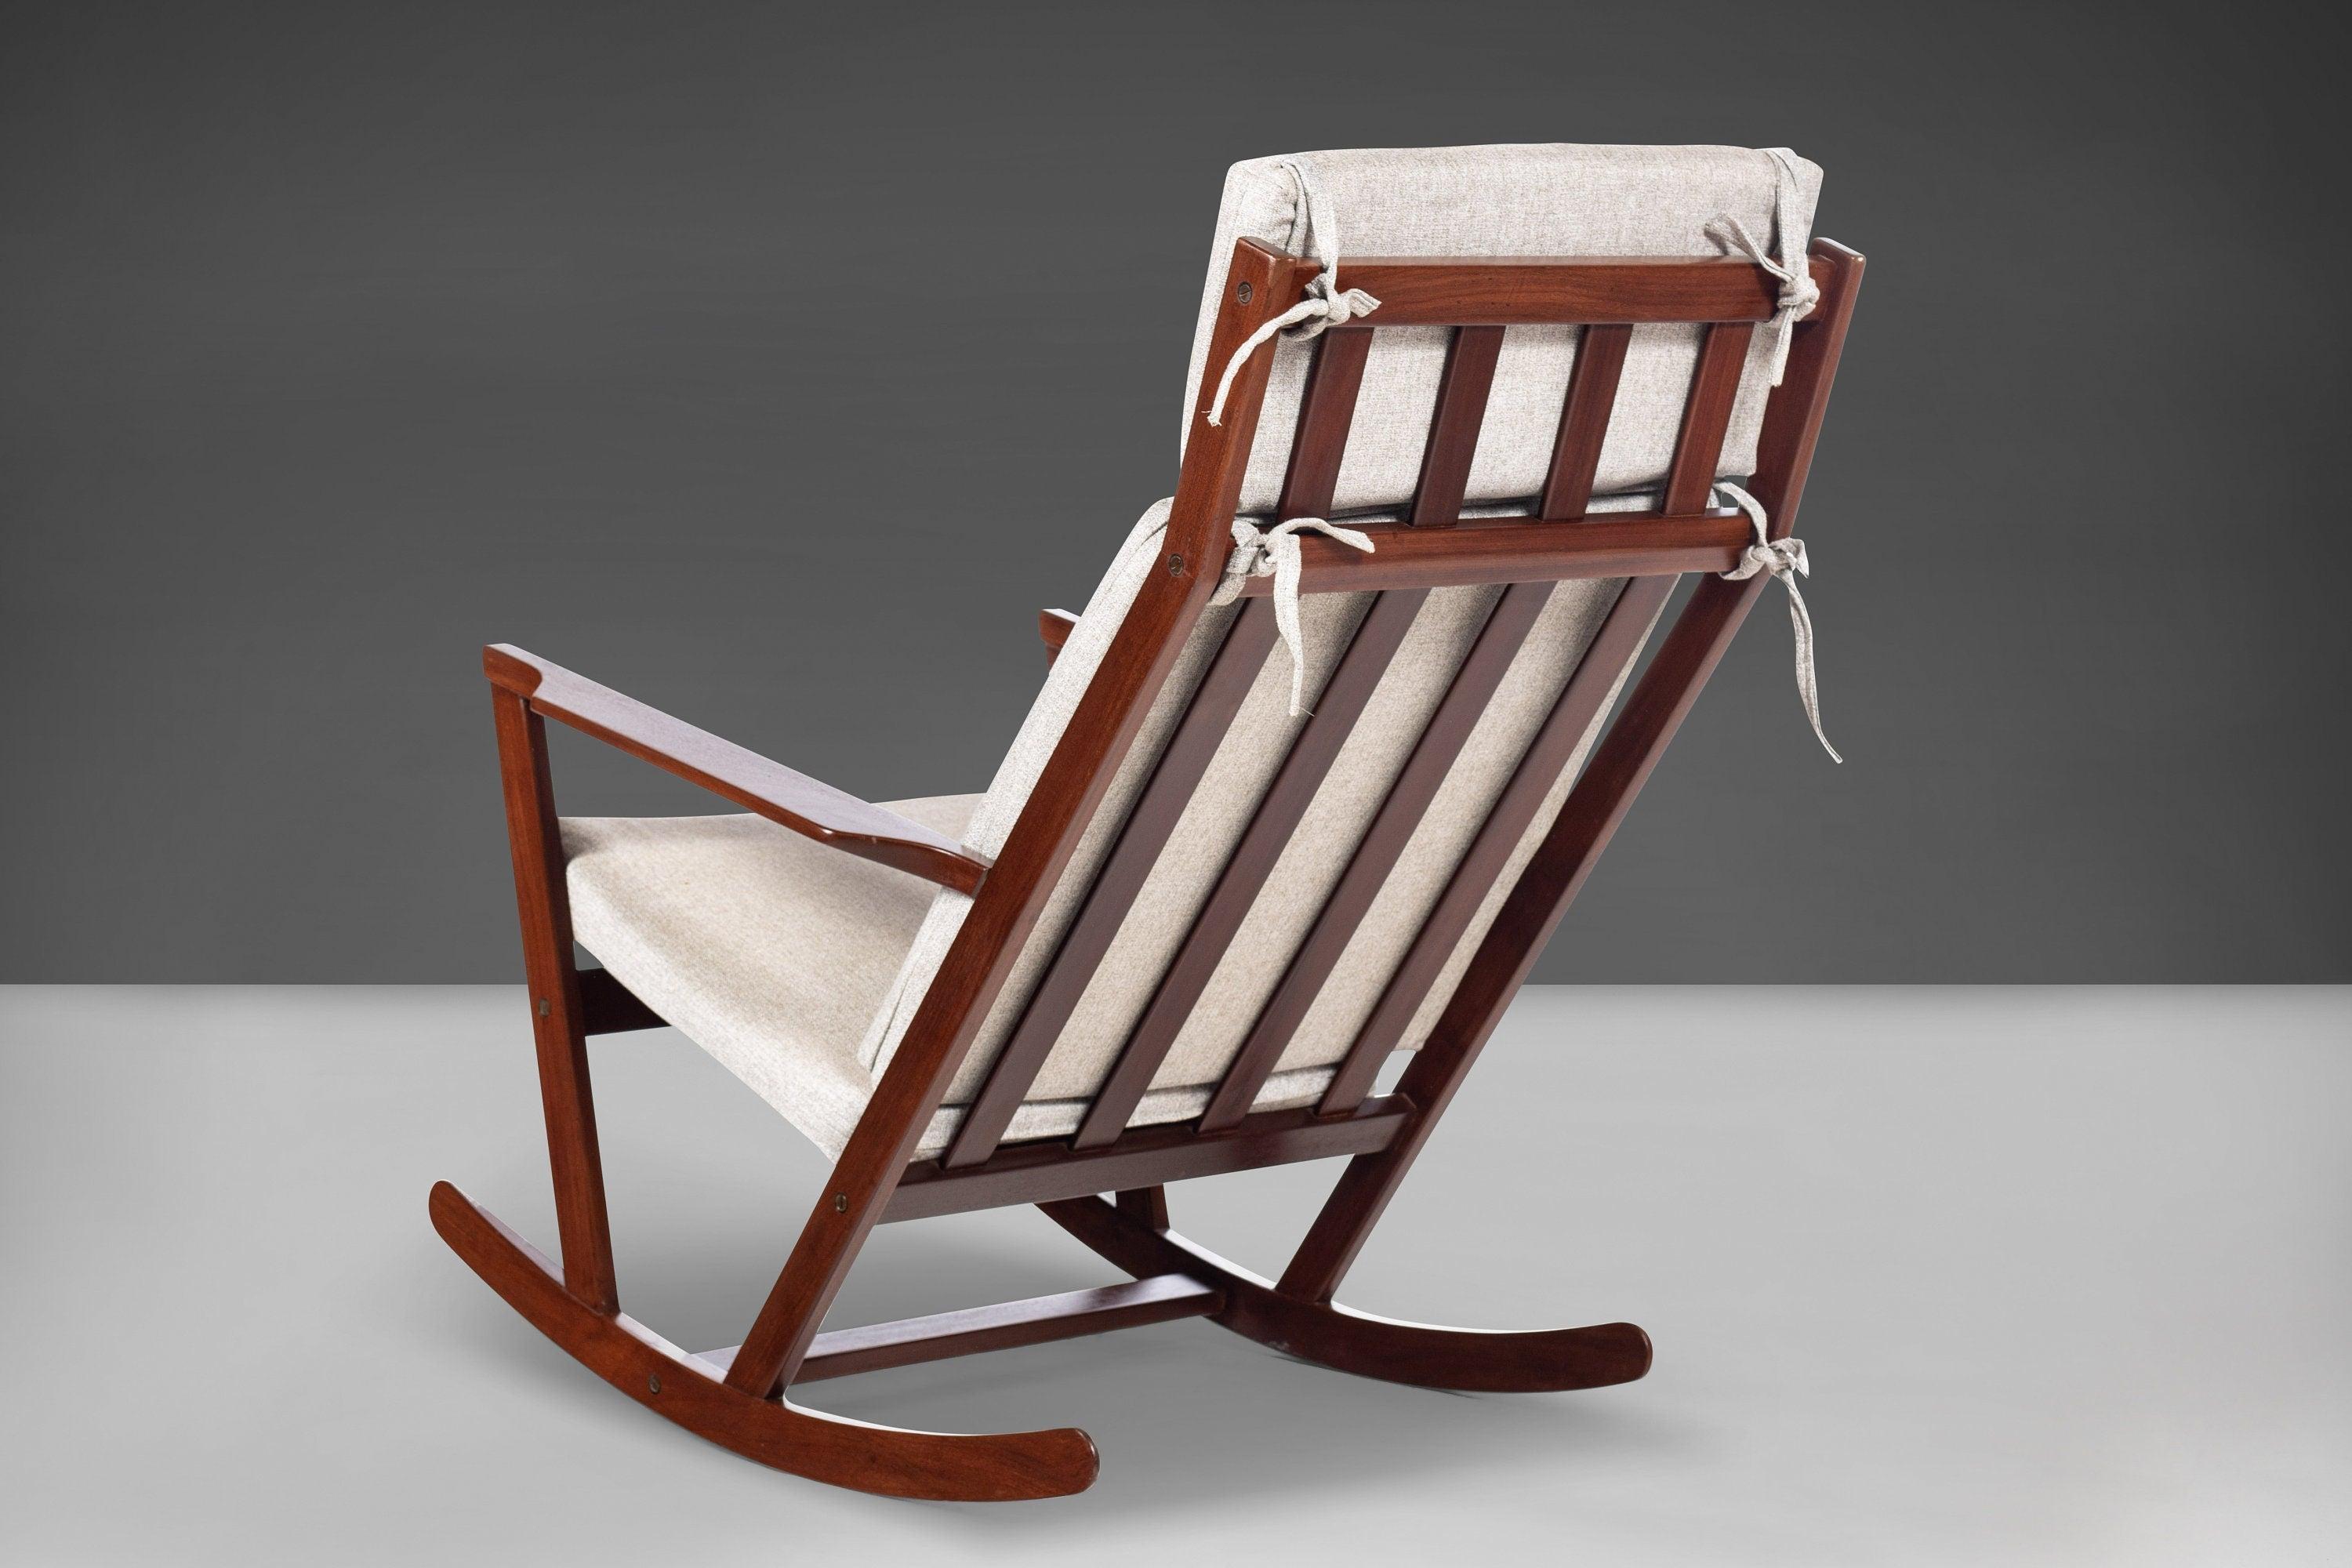 Danish Rocking Chair by Poul Volther for Frem Rojle in Afromosia, New Fabric, c. 1960s For Sale